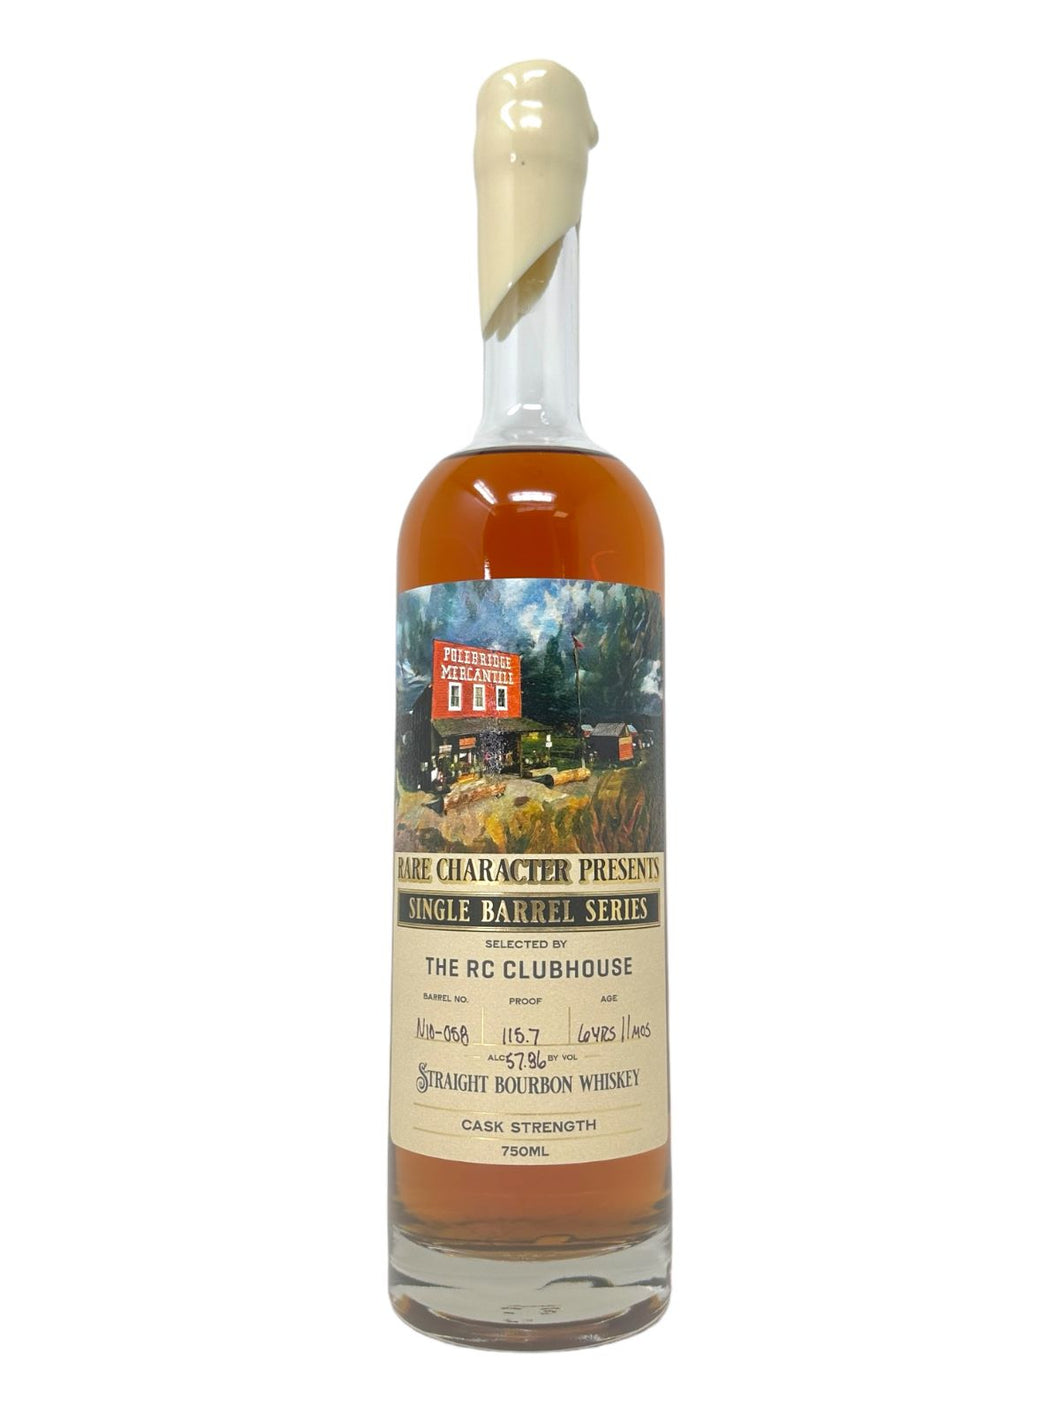 Rare Character Whiskey Straight Bourbon Whiskey #NIO-058 115.7 proof - Selected by The RC Clubhouse